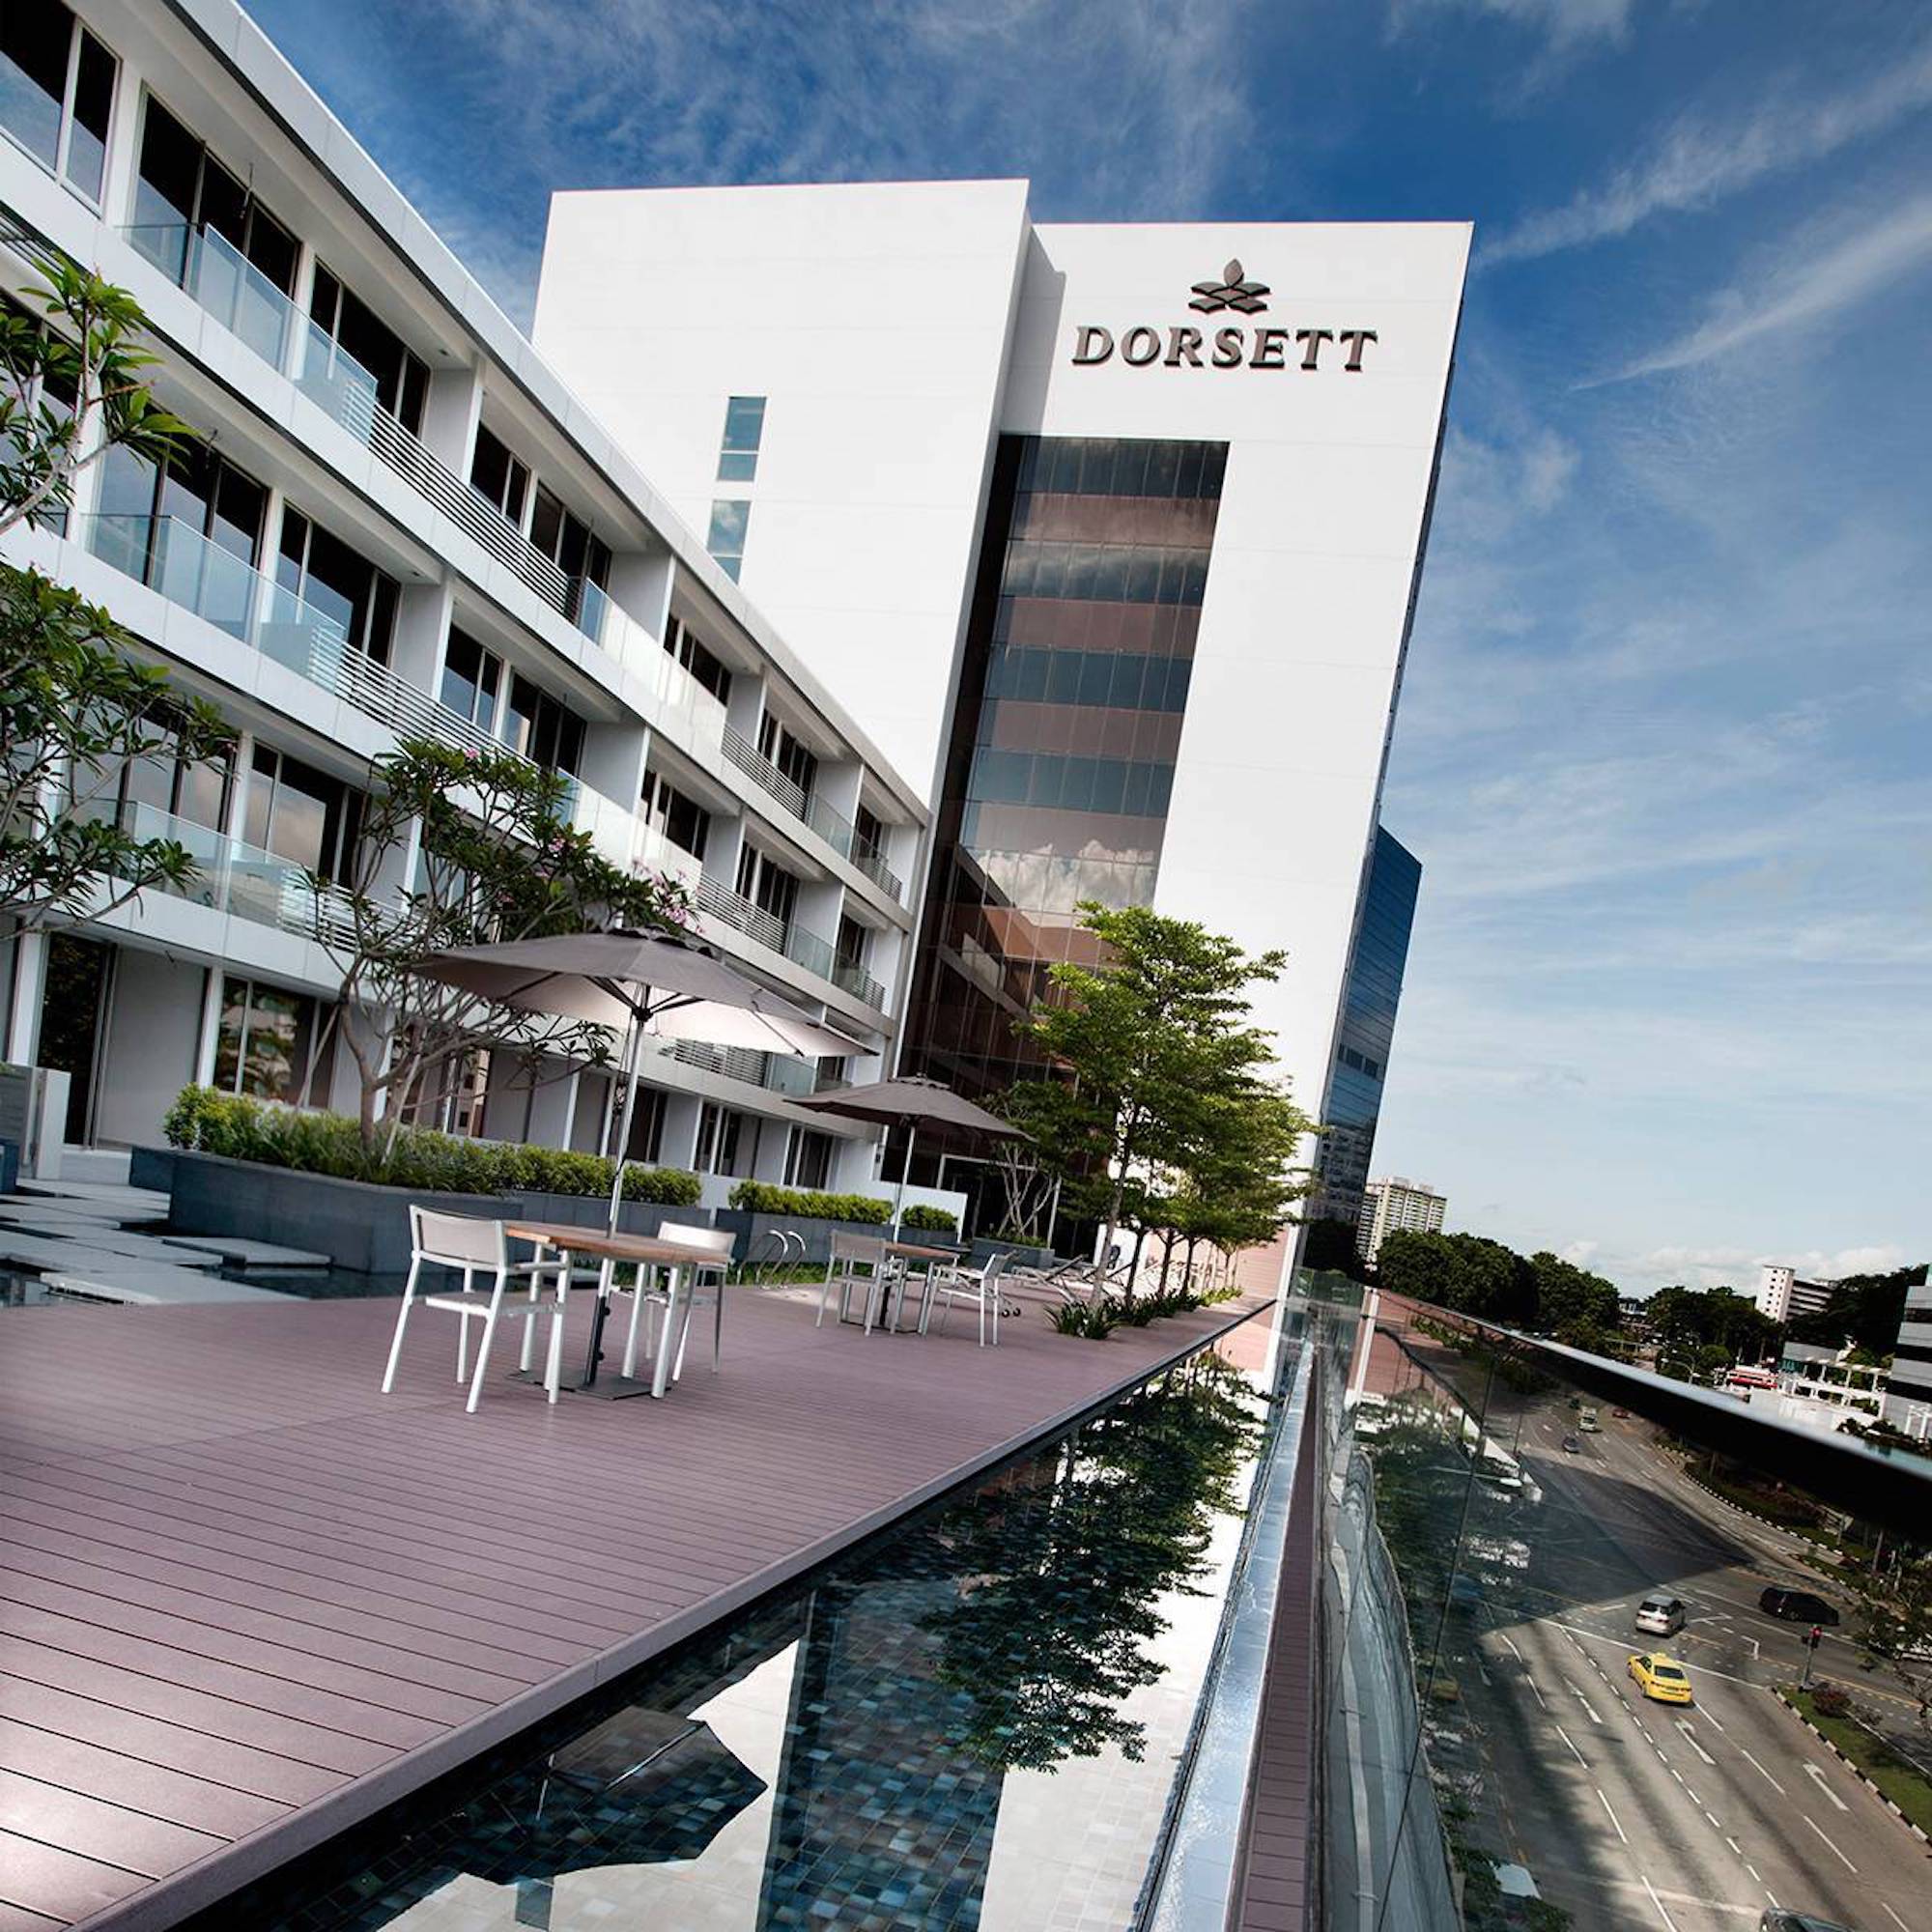 Get 3 Wishes And A 26 Hour Stay When You Book For 1 Night With Dorsett Singapore